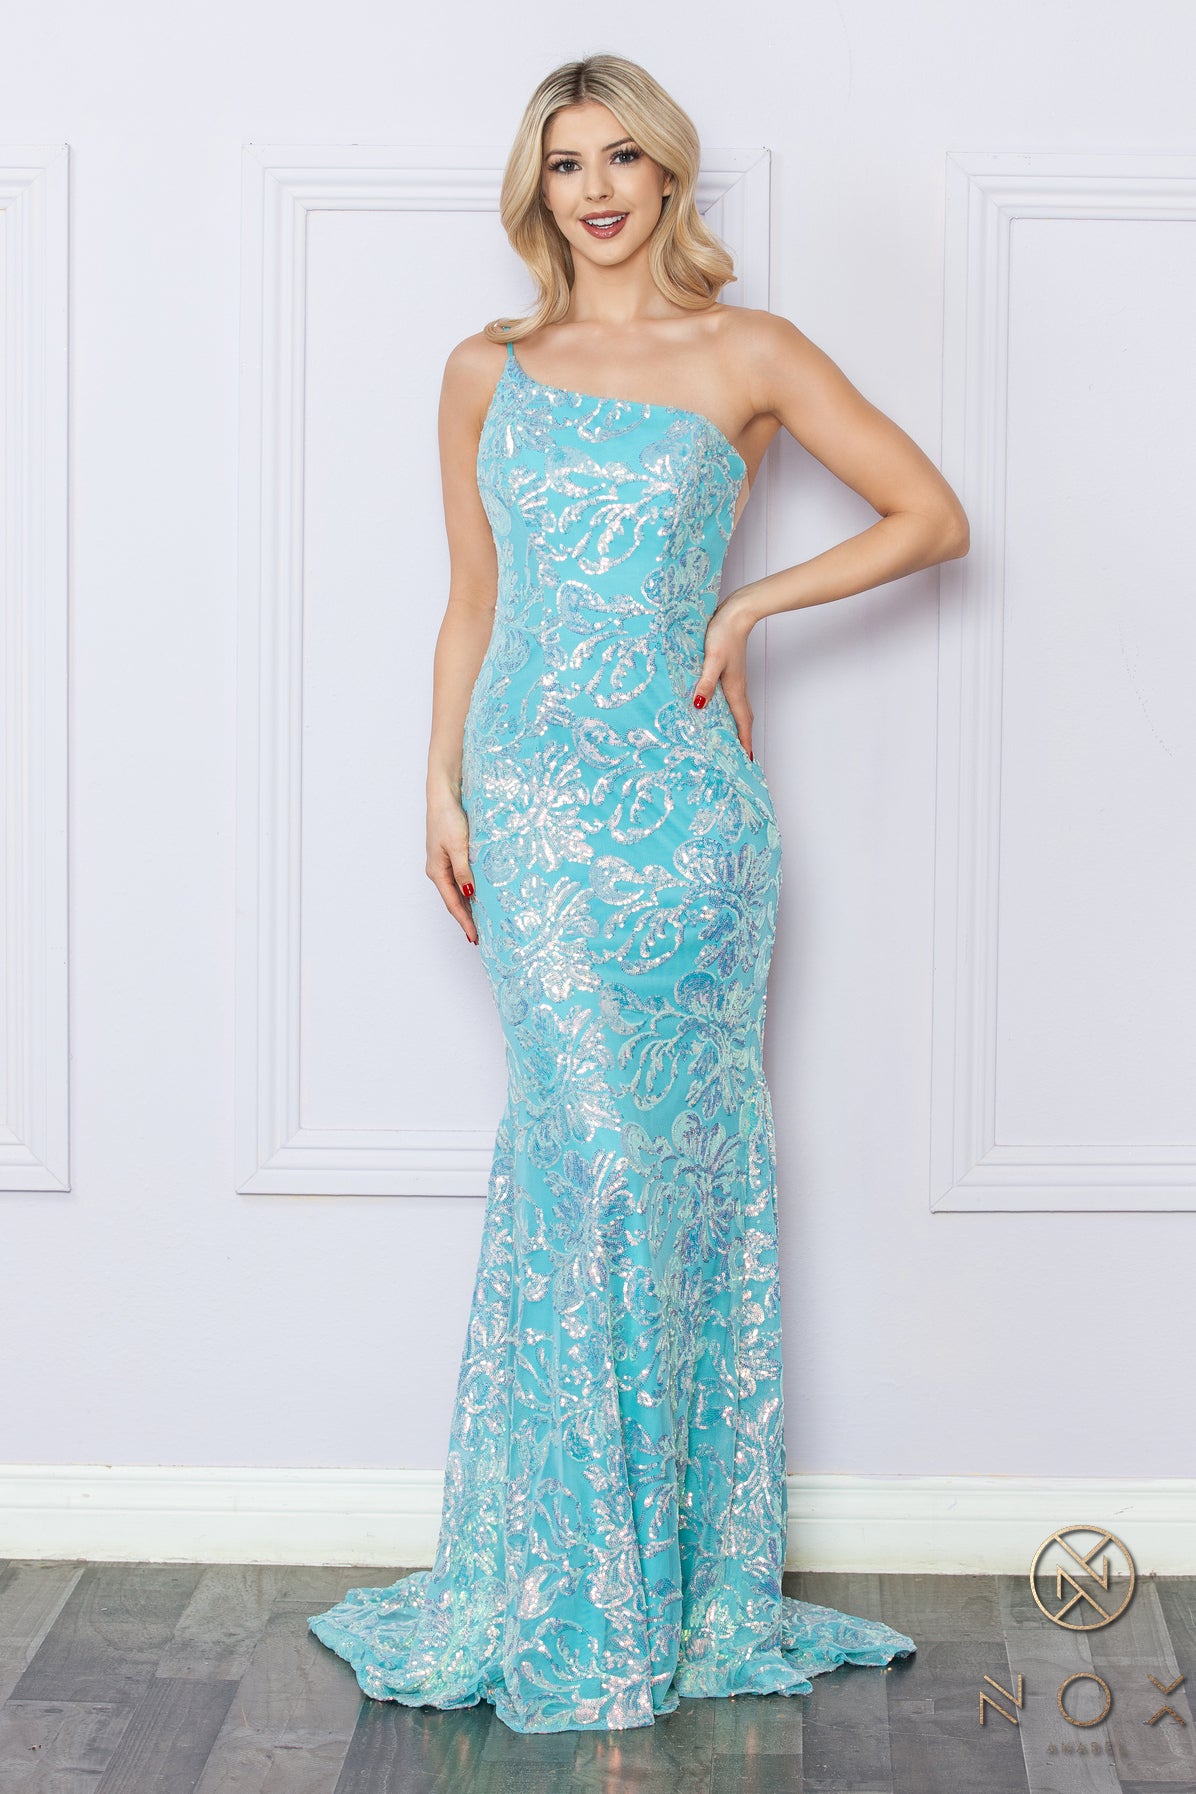 Be the ultimate showstopper in this stunning Nox Anabel R1308 sequin lace one shoulder prom dress. The mermaid silhouette and formal design will give you the confidence to shine on any pageant stage. Guaranteed to make a lasting impression, this gown is a must-have for any special occasion.  Size: 0-16  Colors: Fuchsia, Aqua Blue, White Multi